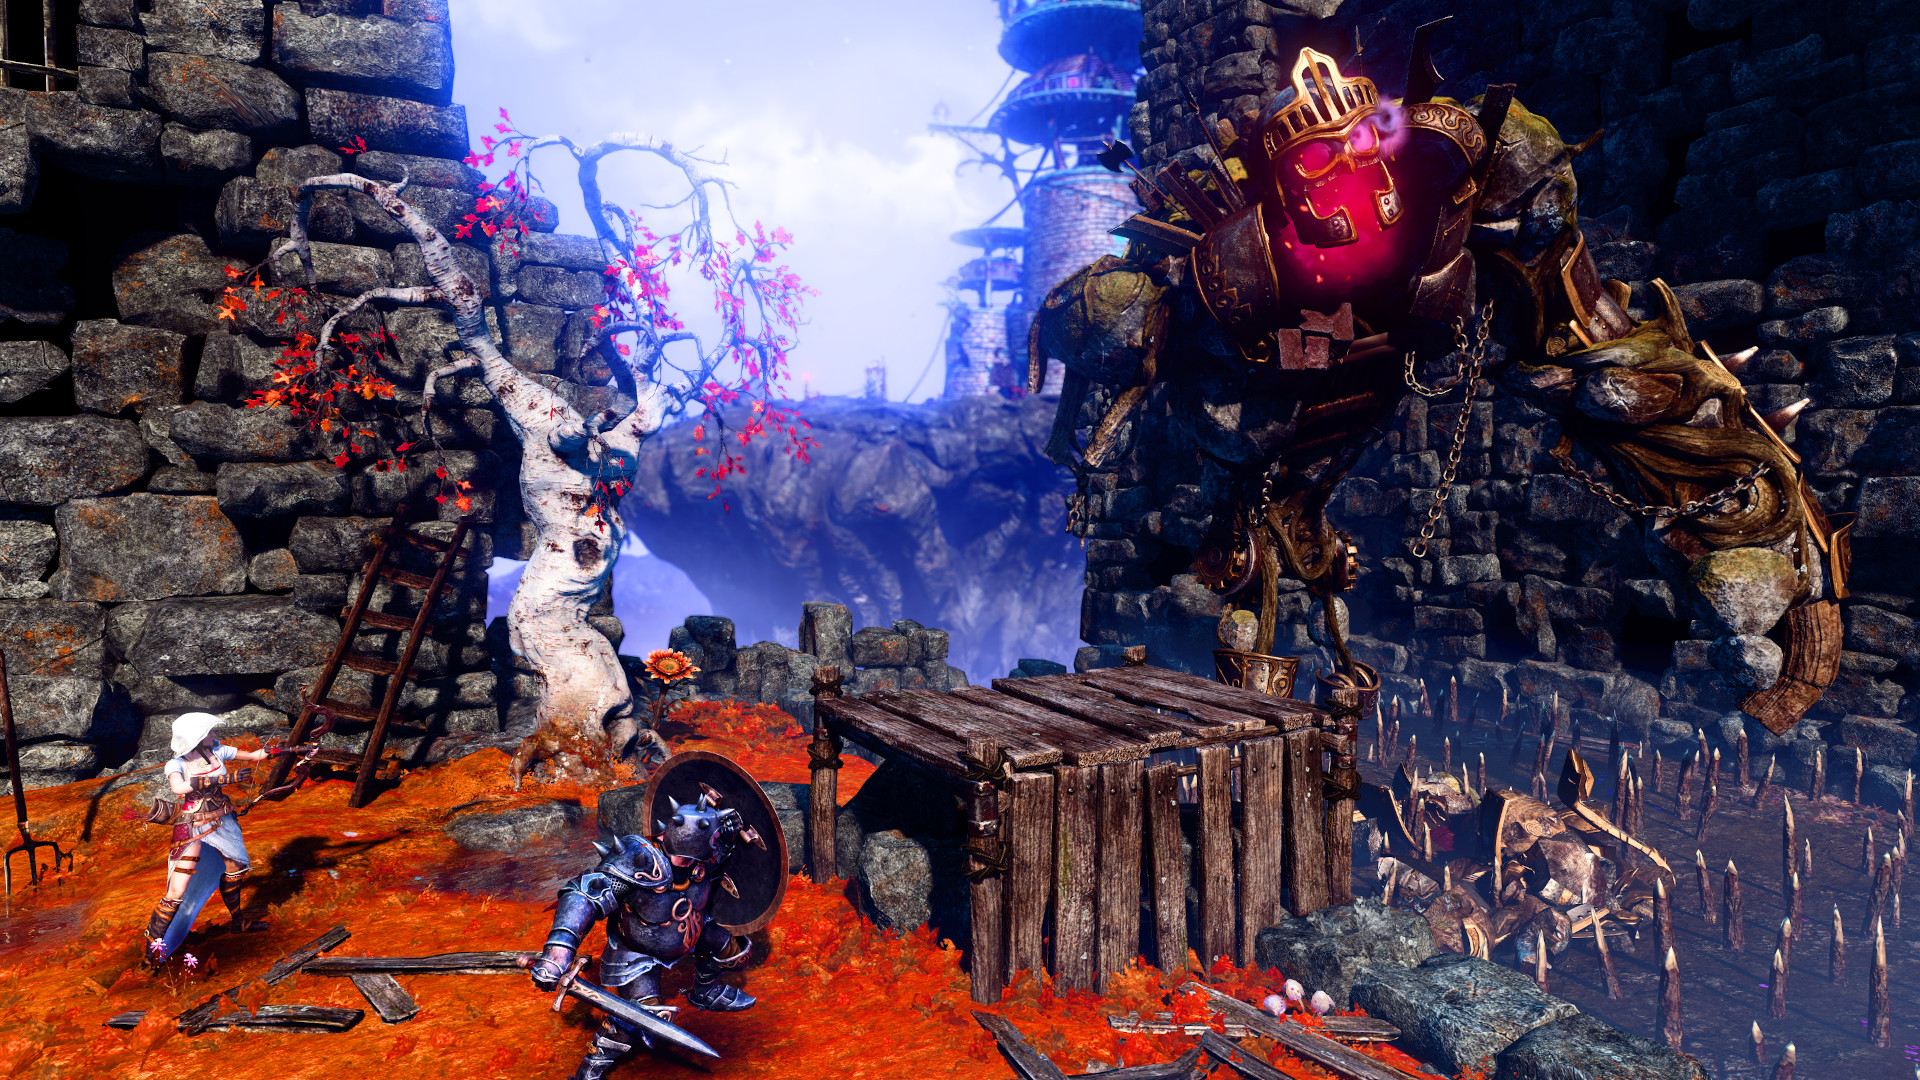 Save 75 On Trine 3 The Artifacts Of Power On Steam